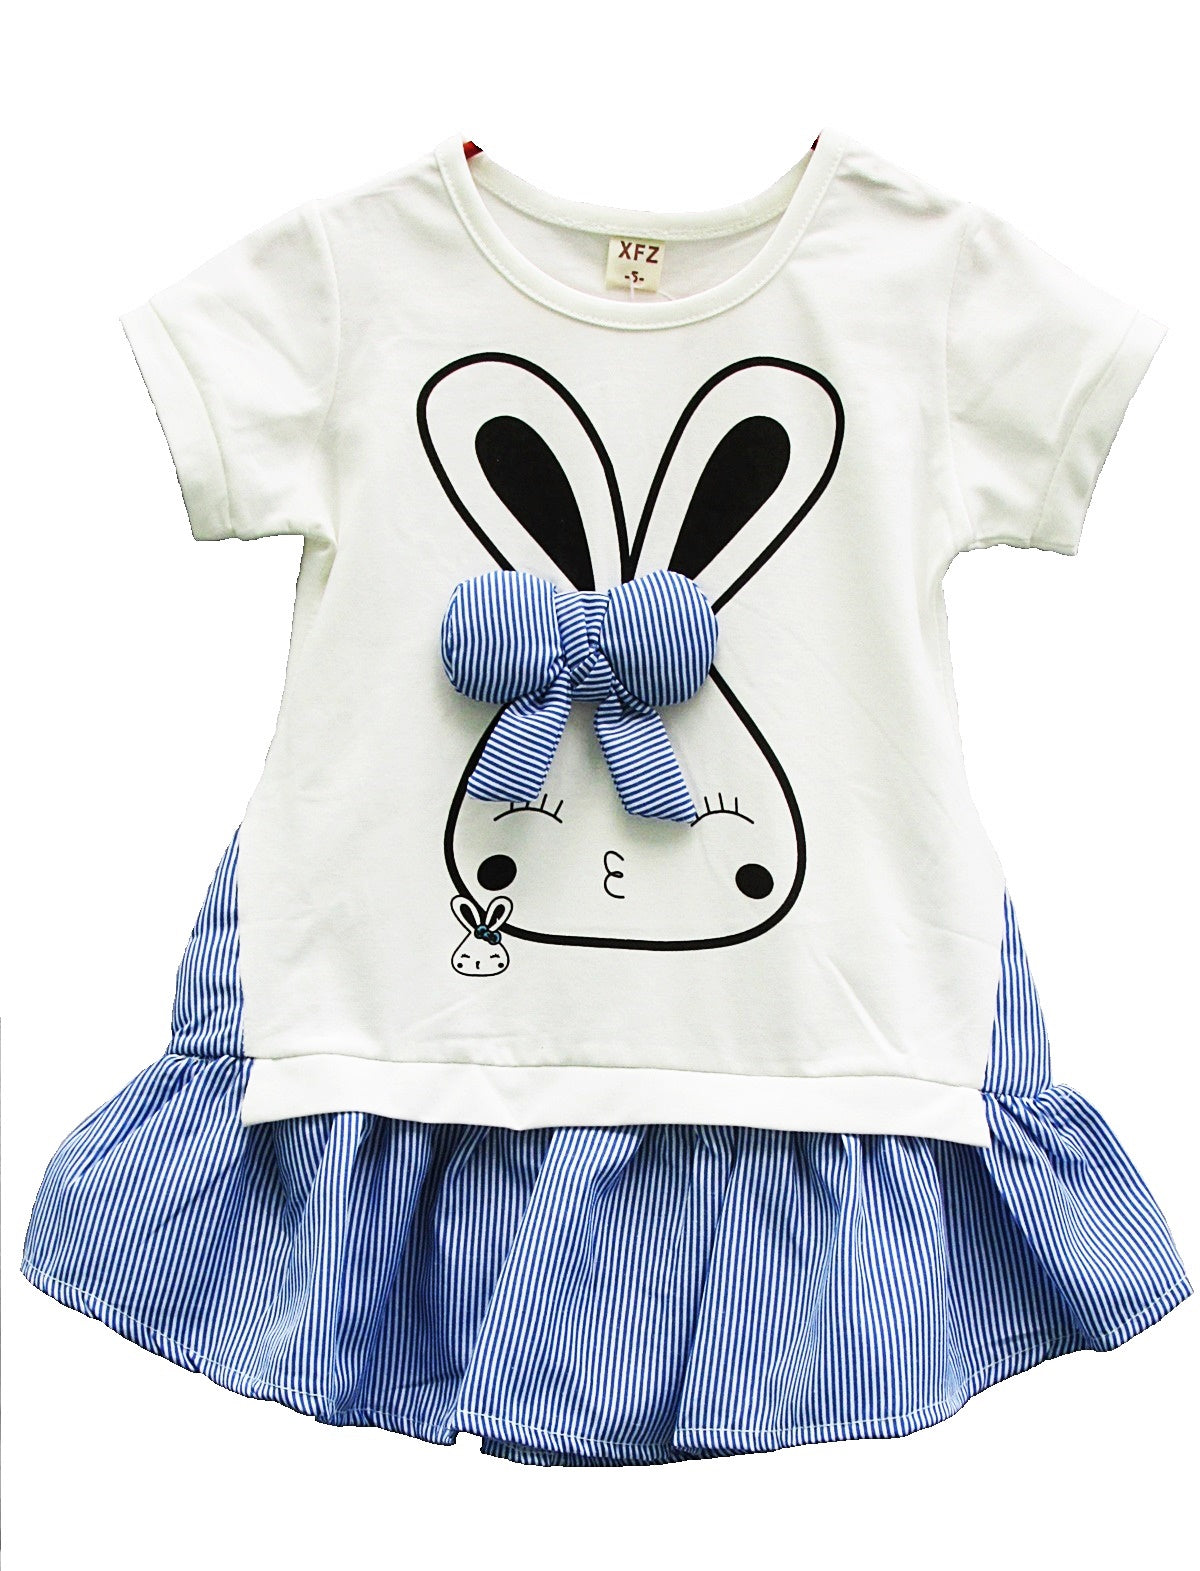 Printed Cotton Party 1 Piece Dress 2-5 Years